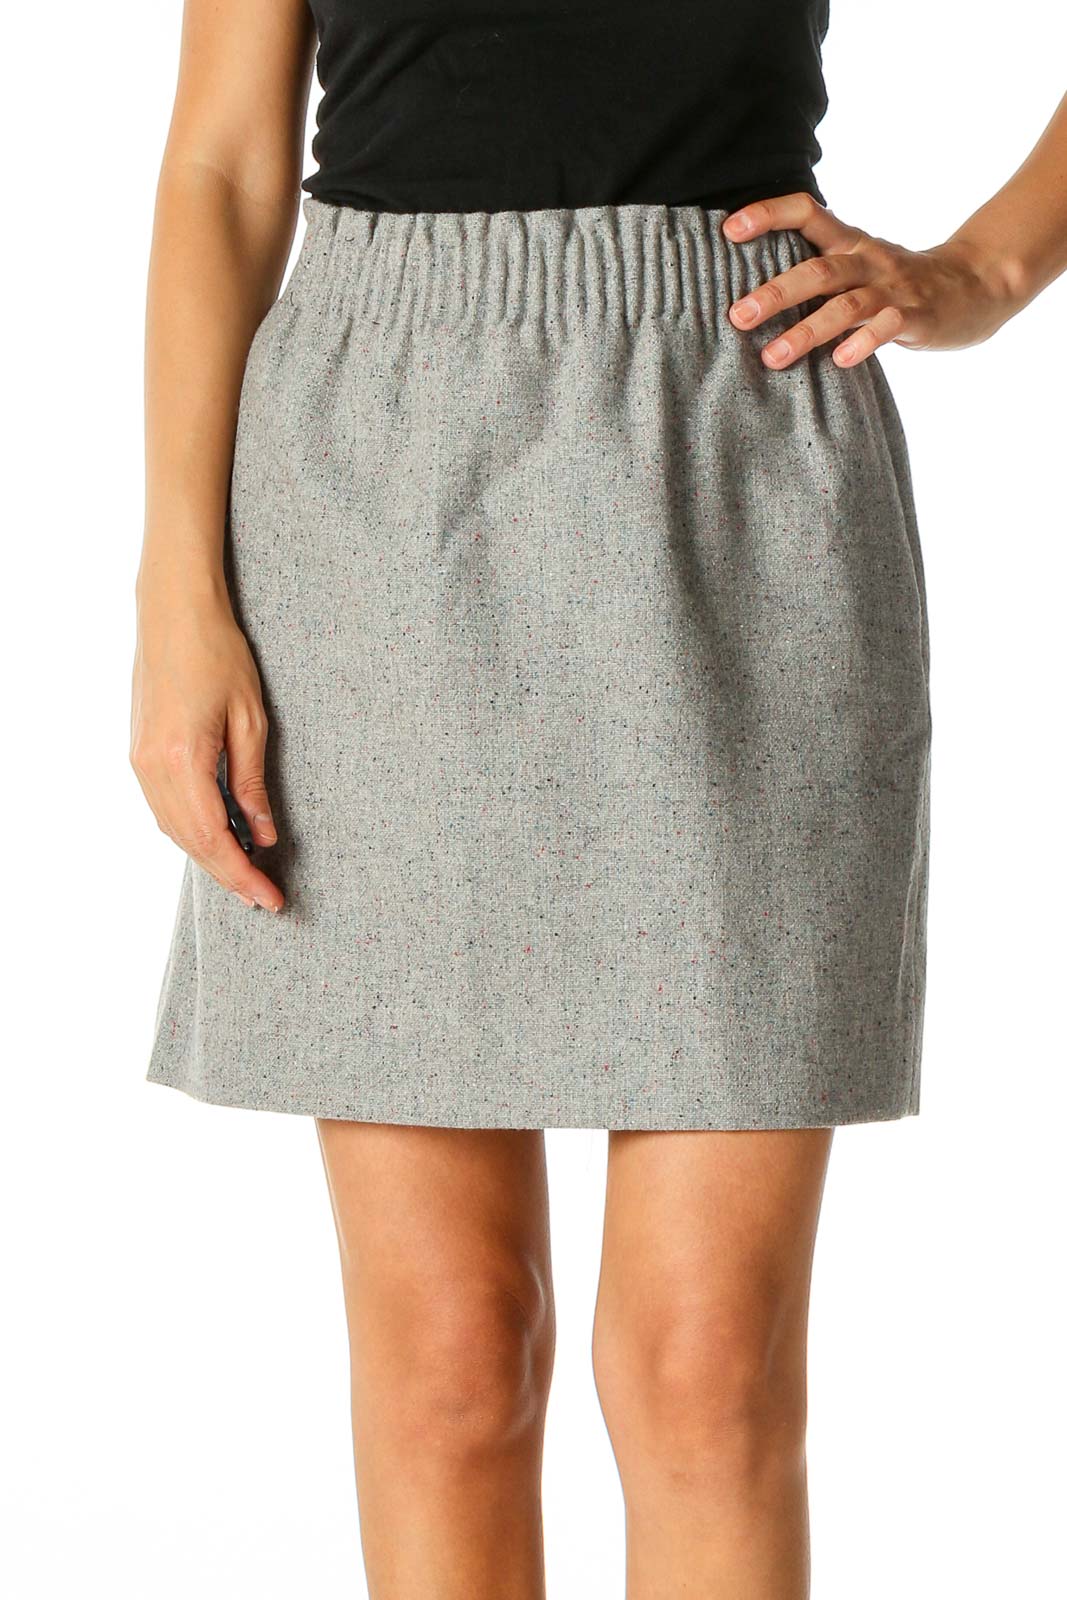 Gray Textured Chic A-Line Skirt Front